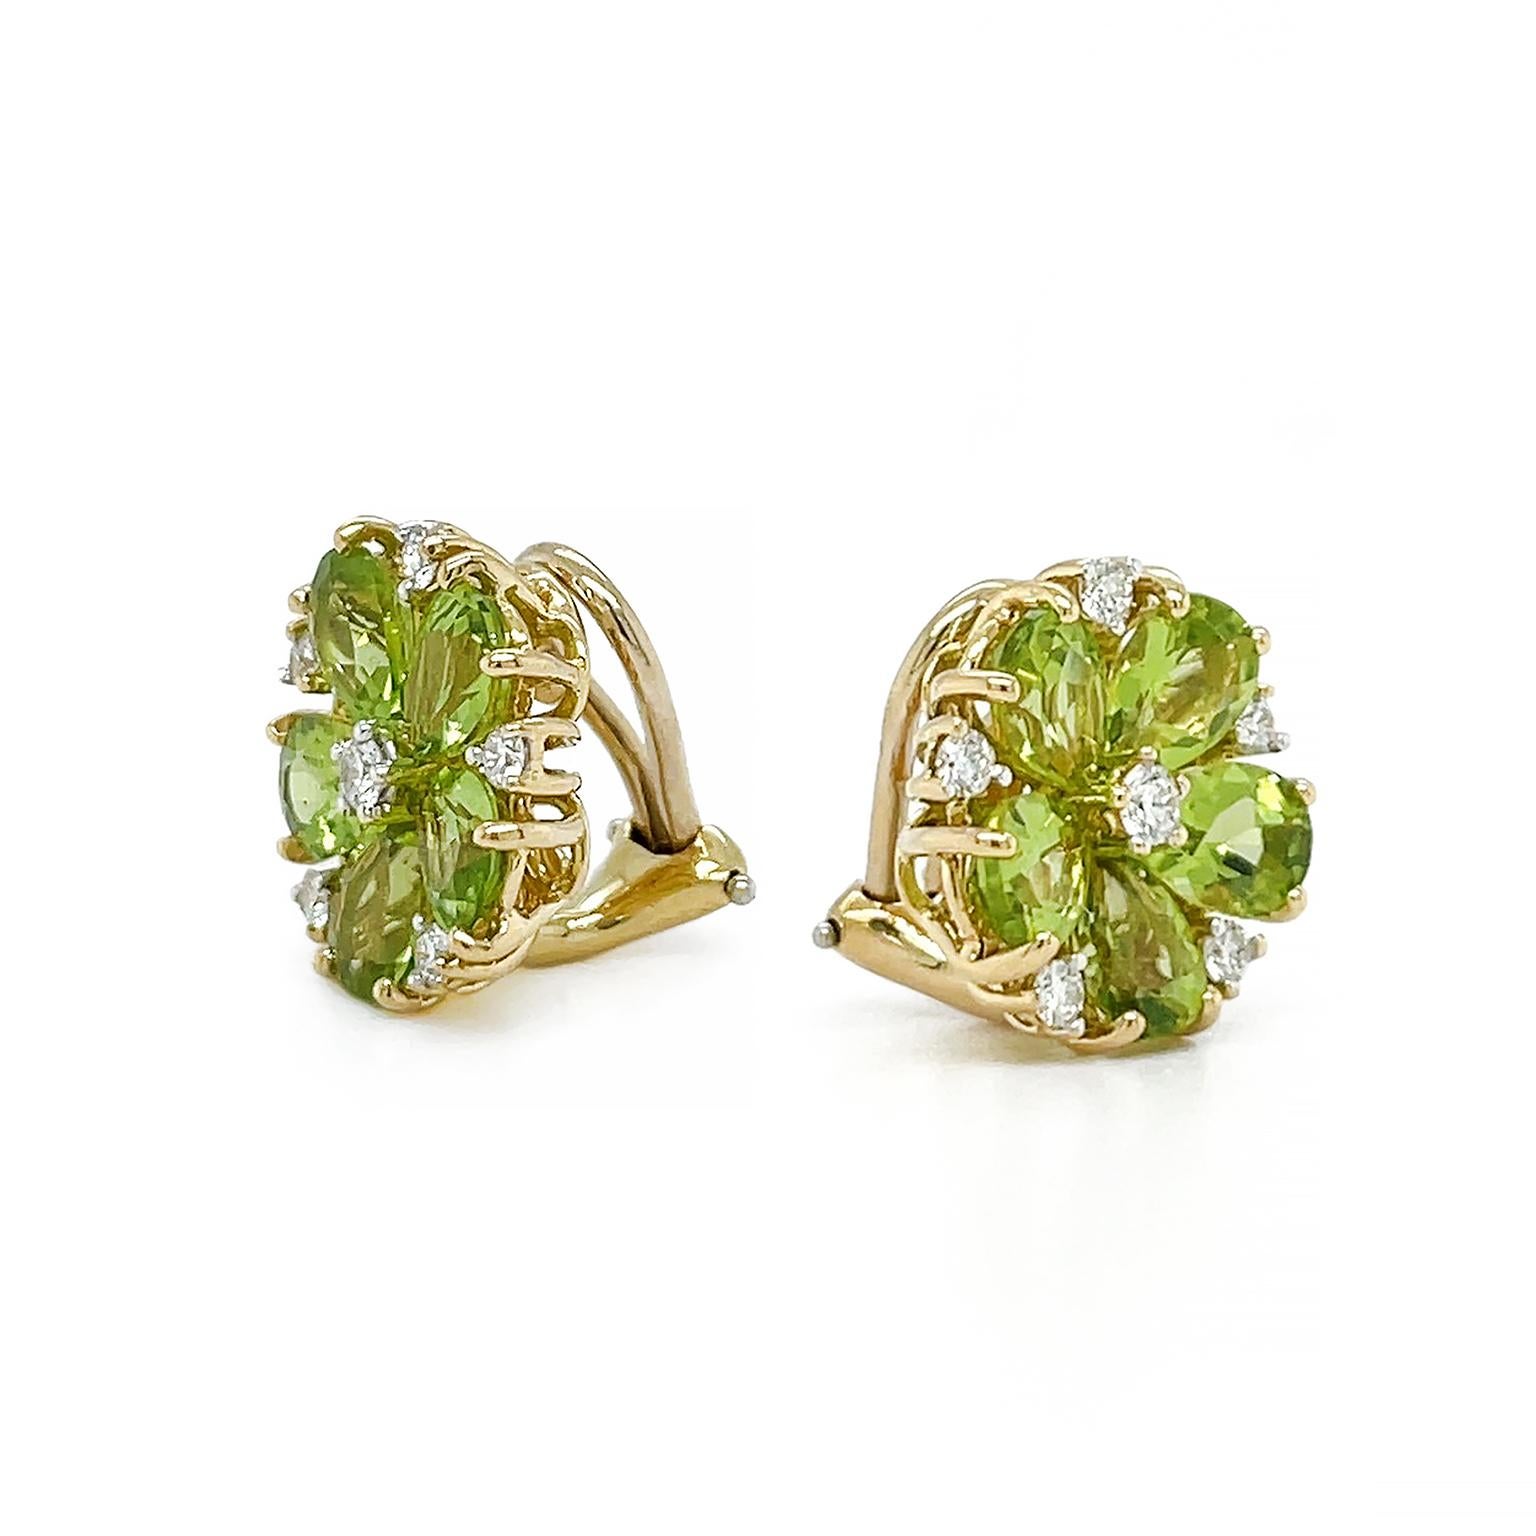 Glistering jewels imitate nature in these earrings. Sparkling pear-shaped peridots are arranged with their broadest edges facing out. Their tapered points draw the eye to a single brilliant-cut diamond in the center. In between each peridot, a